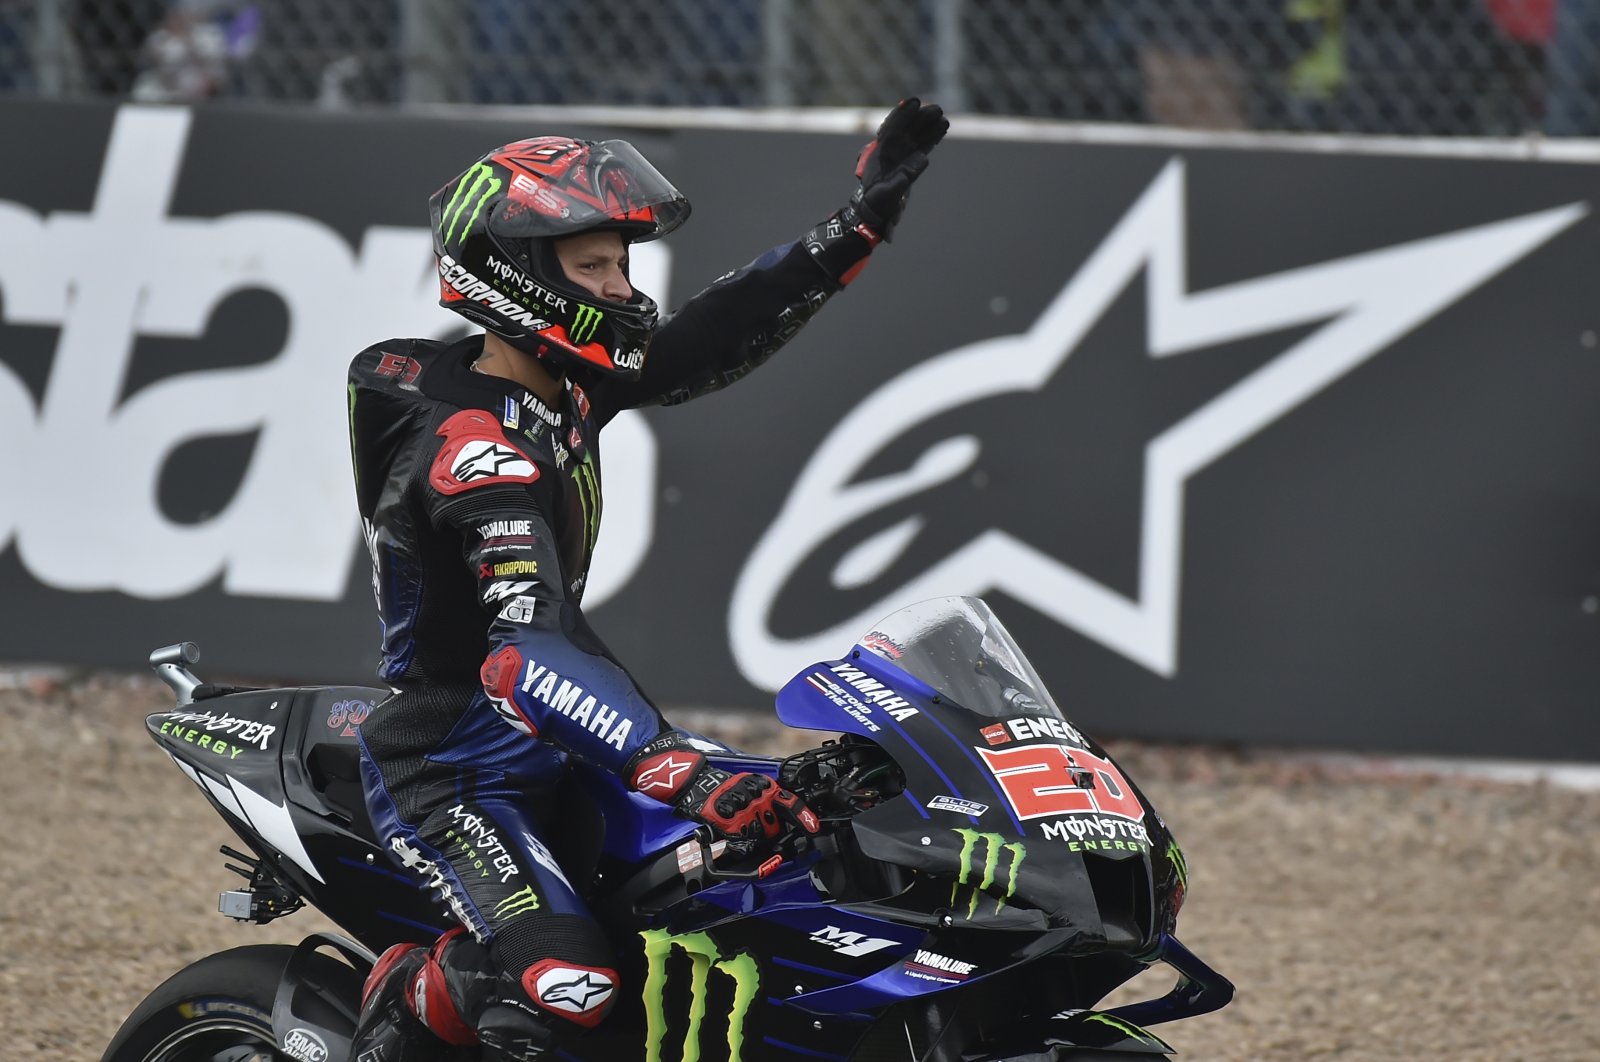 Fabio Quartararo waves to fans after the MotoGP race, in Silverstone, England, Aug. 29, 2021. (AP PHOTO) 